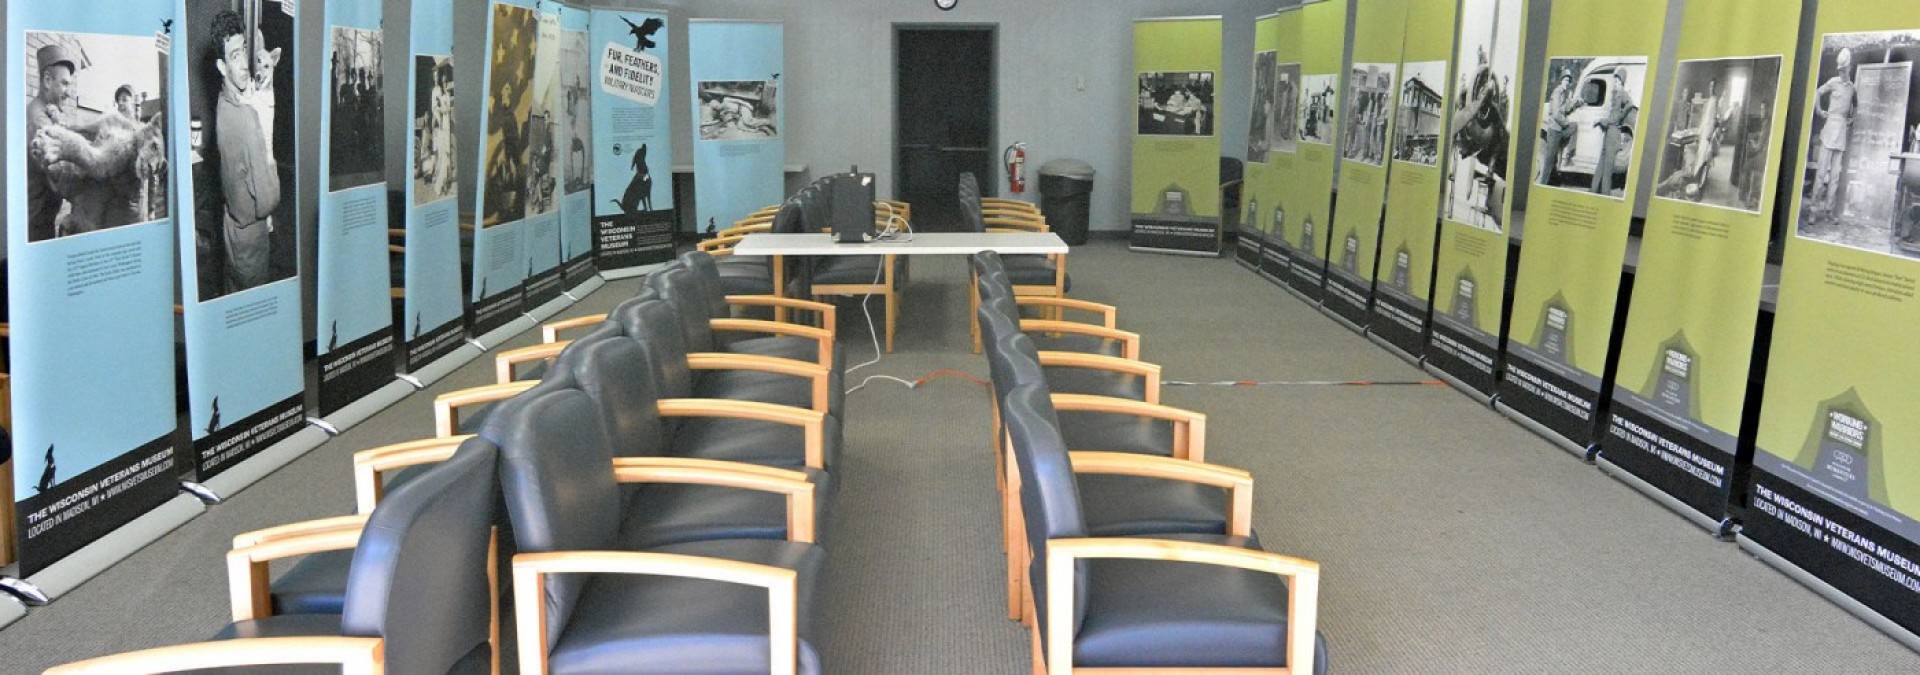 Meeting and training center